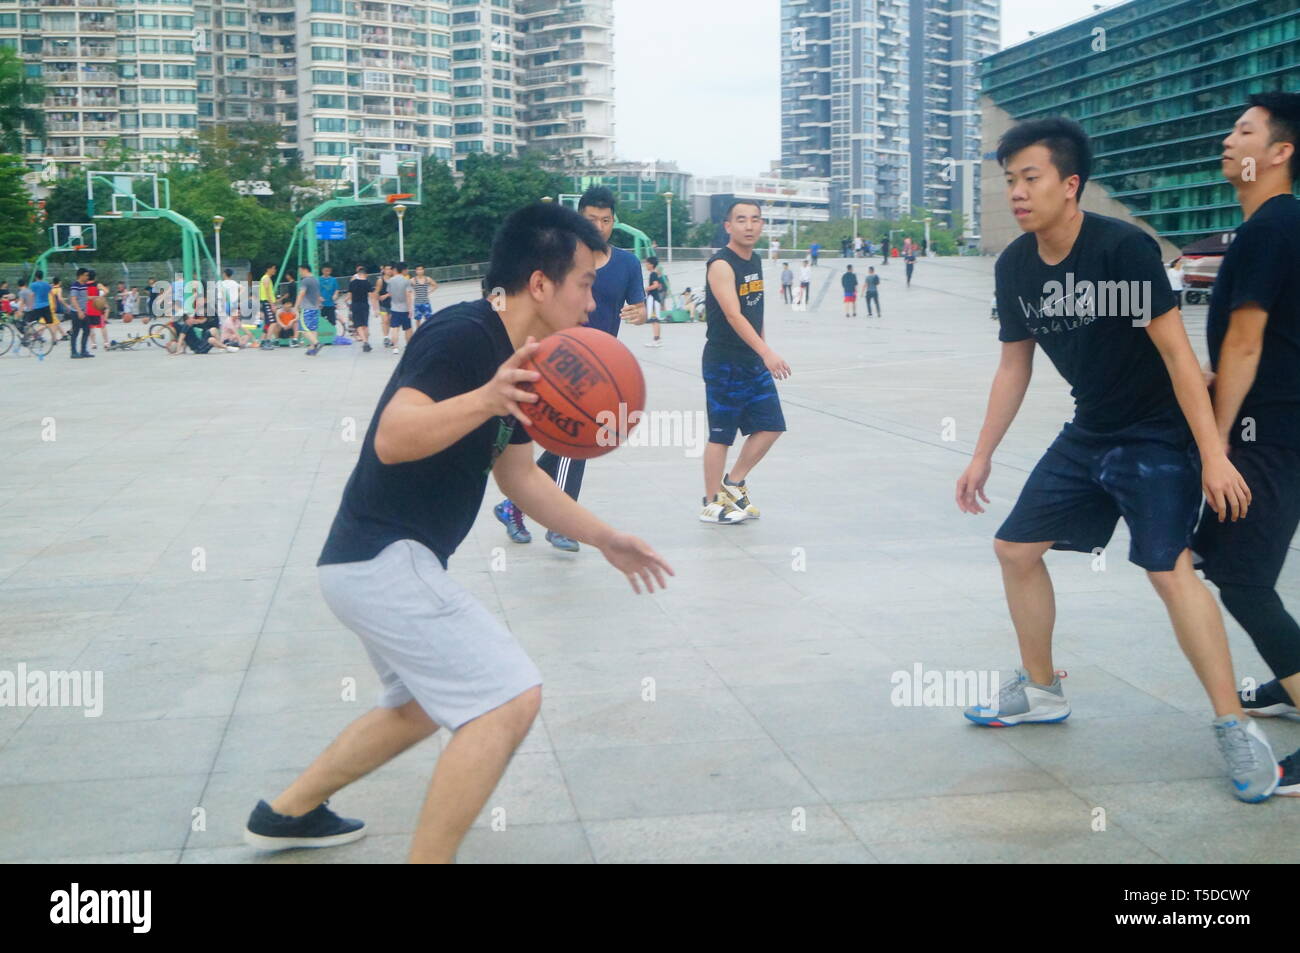 Shenzhen, China: People play basketball on weekends Stock Photo